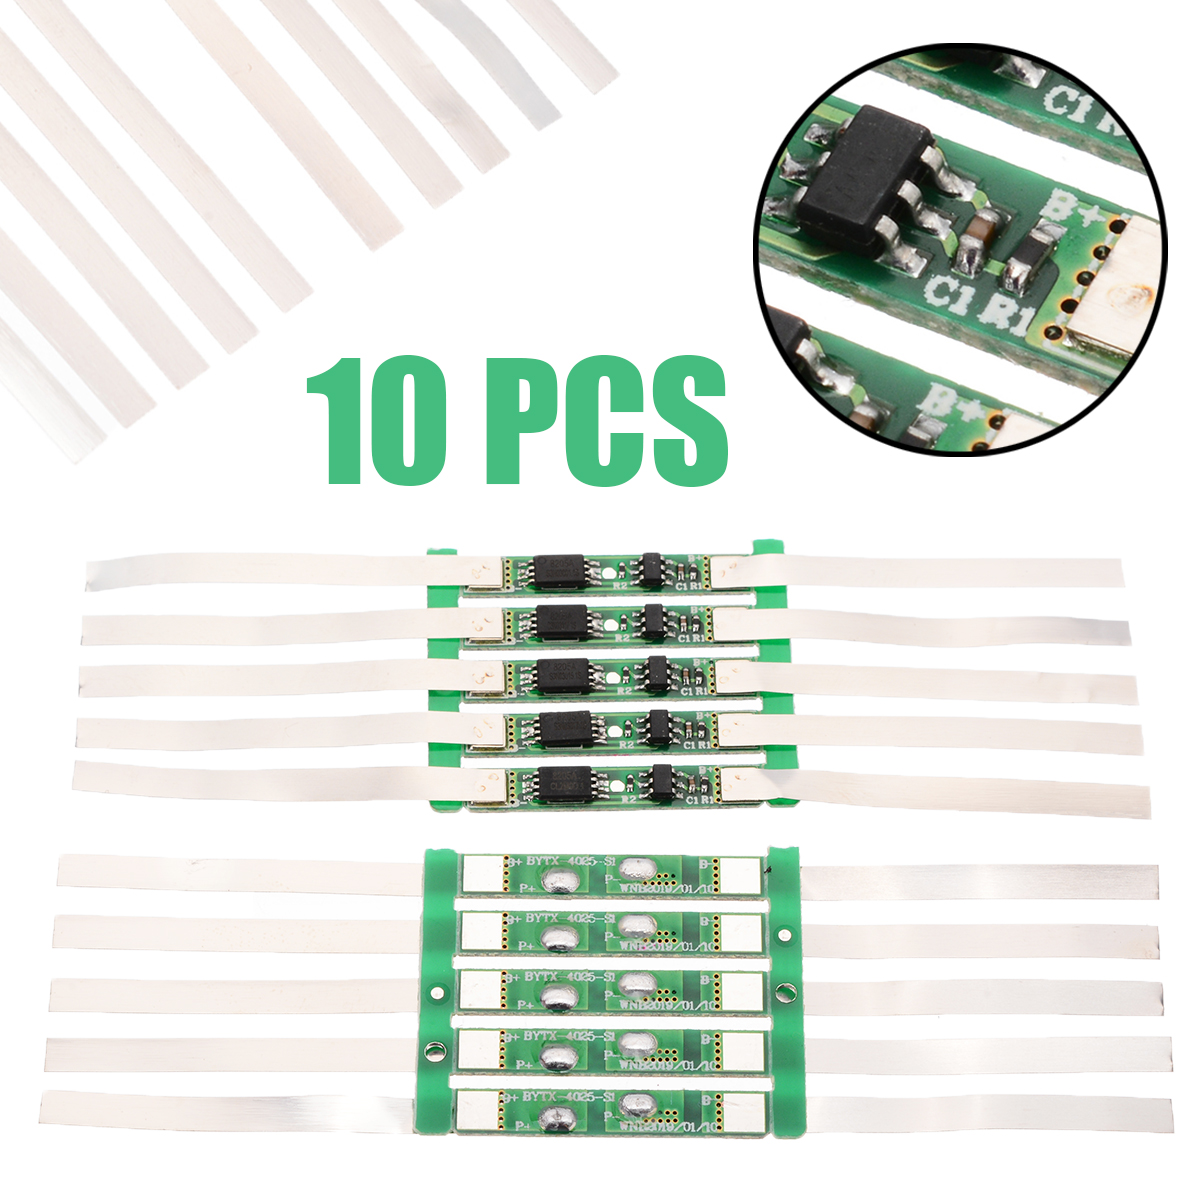 10pcs New 3A BMS Protection Board for 1S 3.7V 18650 Li-ion lithium Battery Cell Over Charging/Short Circuit Protection 18*3.6mm